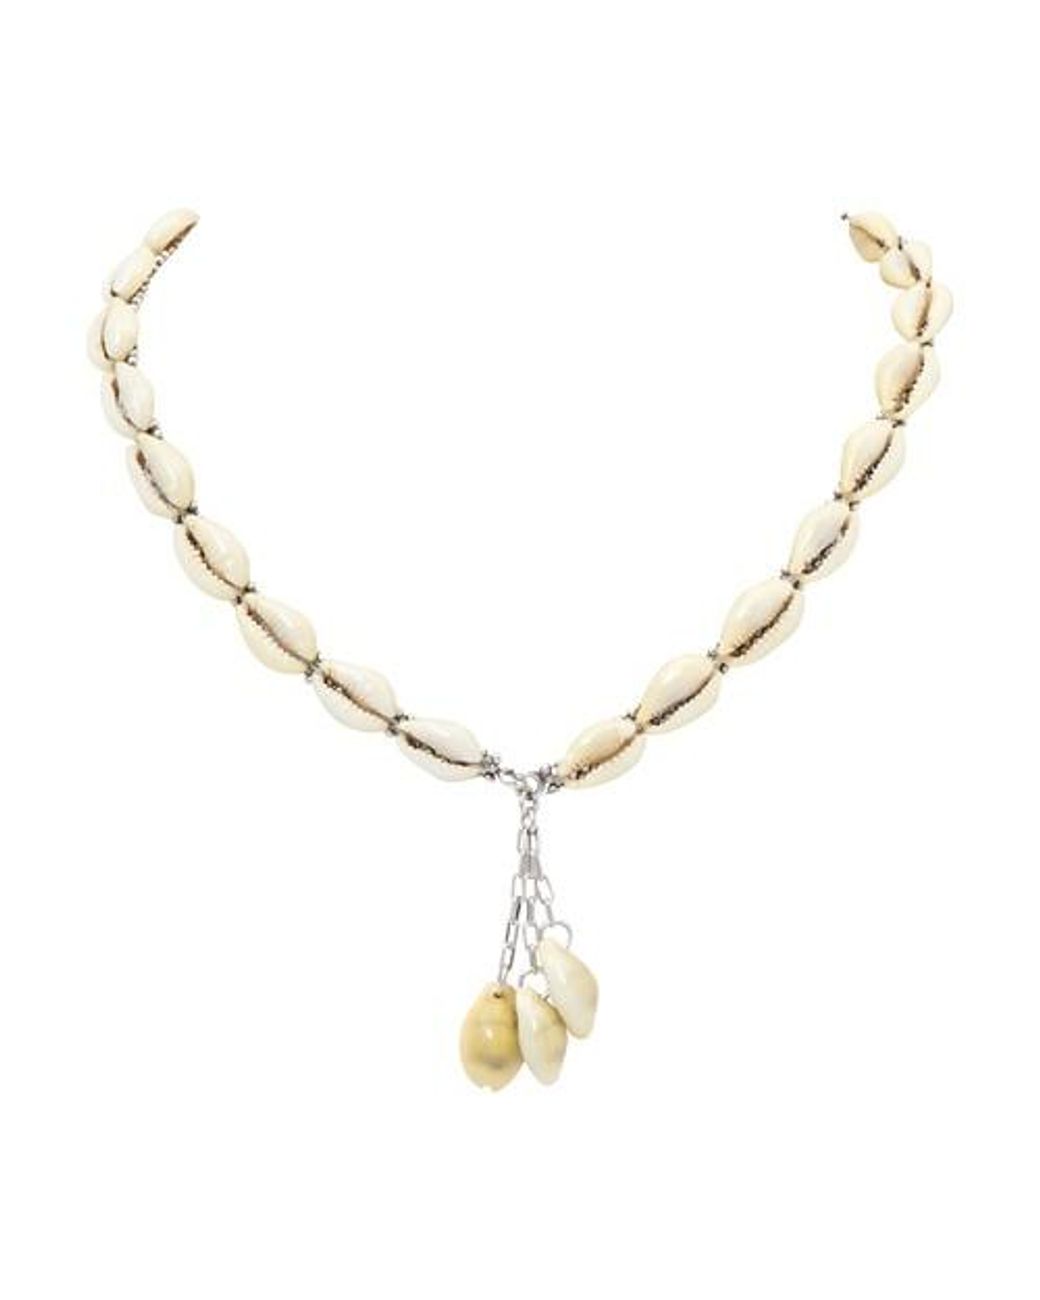 Isabel Marant Choker Necklace in Natural - Lyst